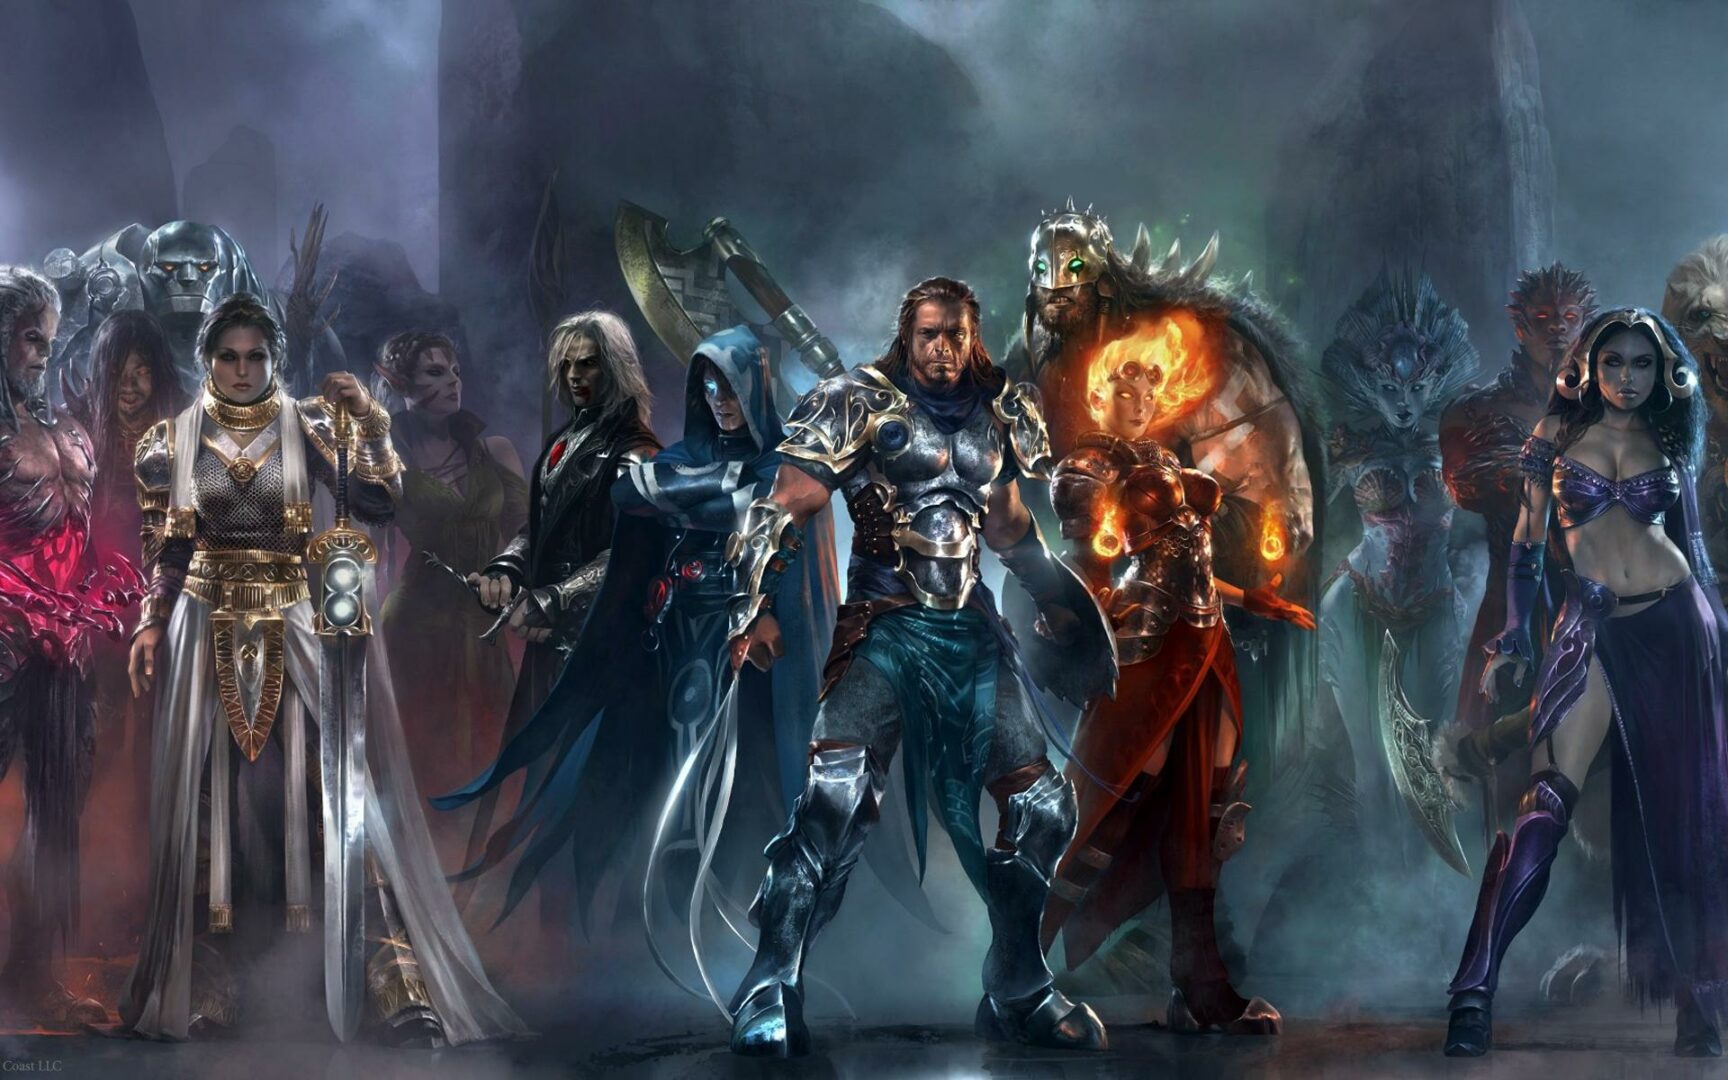 Magic The Gathering RPG Announced